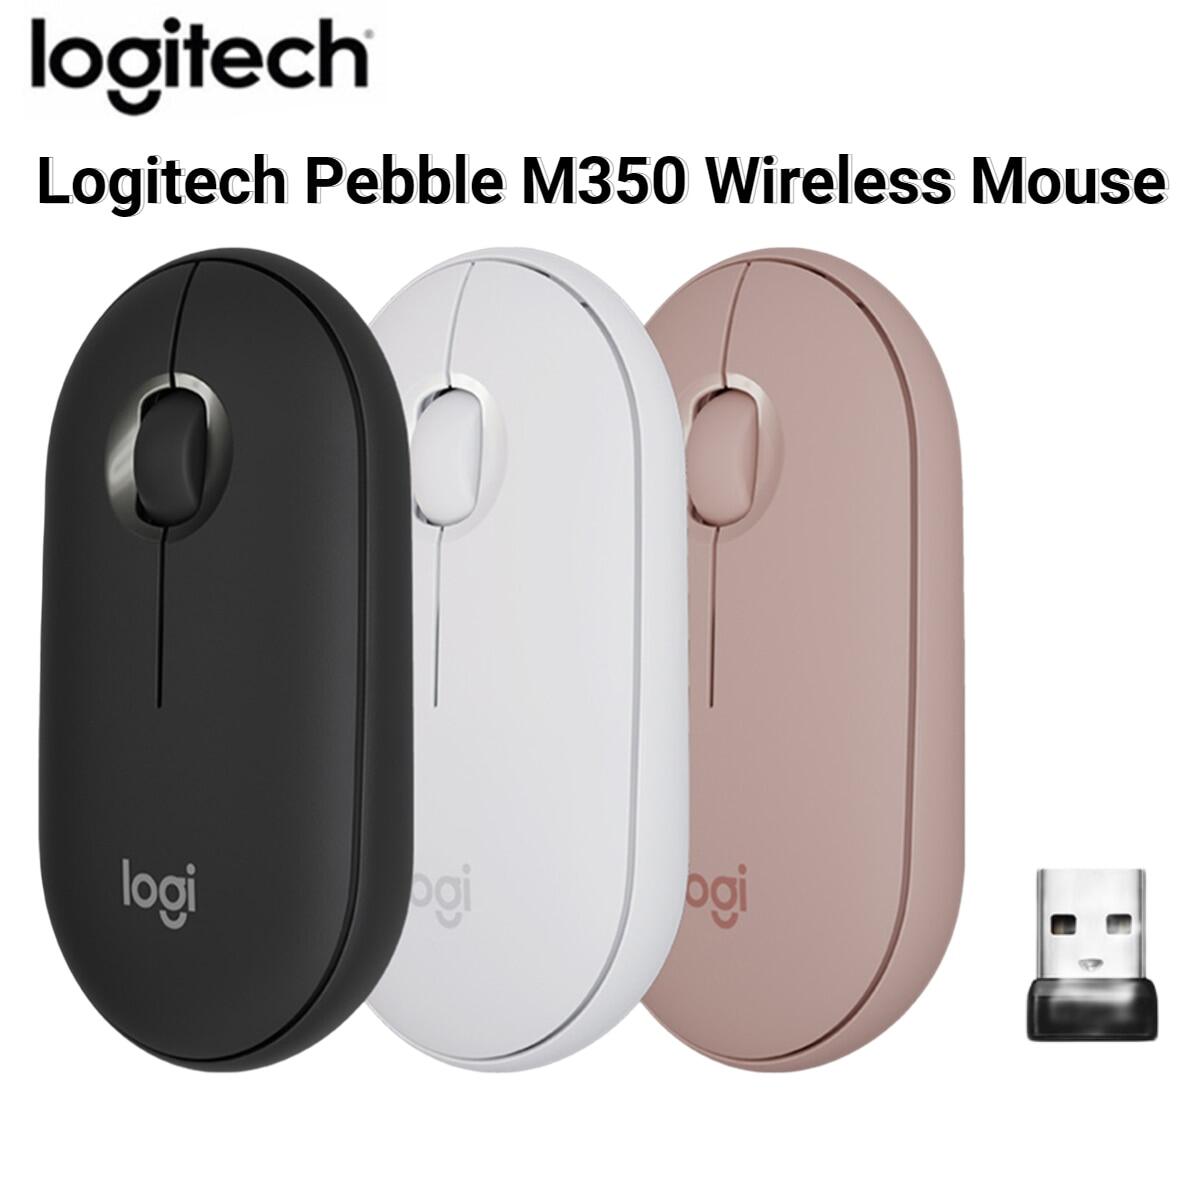 ZZOOI Logitech Pebble M350 2.4G Wireless Mouse 1000 DPI Optical Tracking Mice 3 Buttons Bluetooth-compatible with USB Nano Receiver